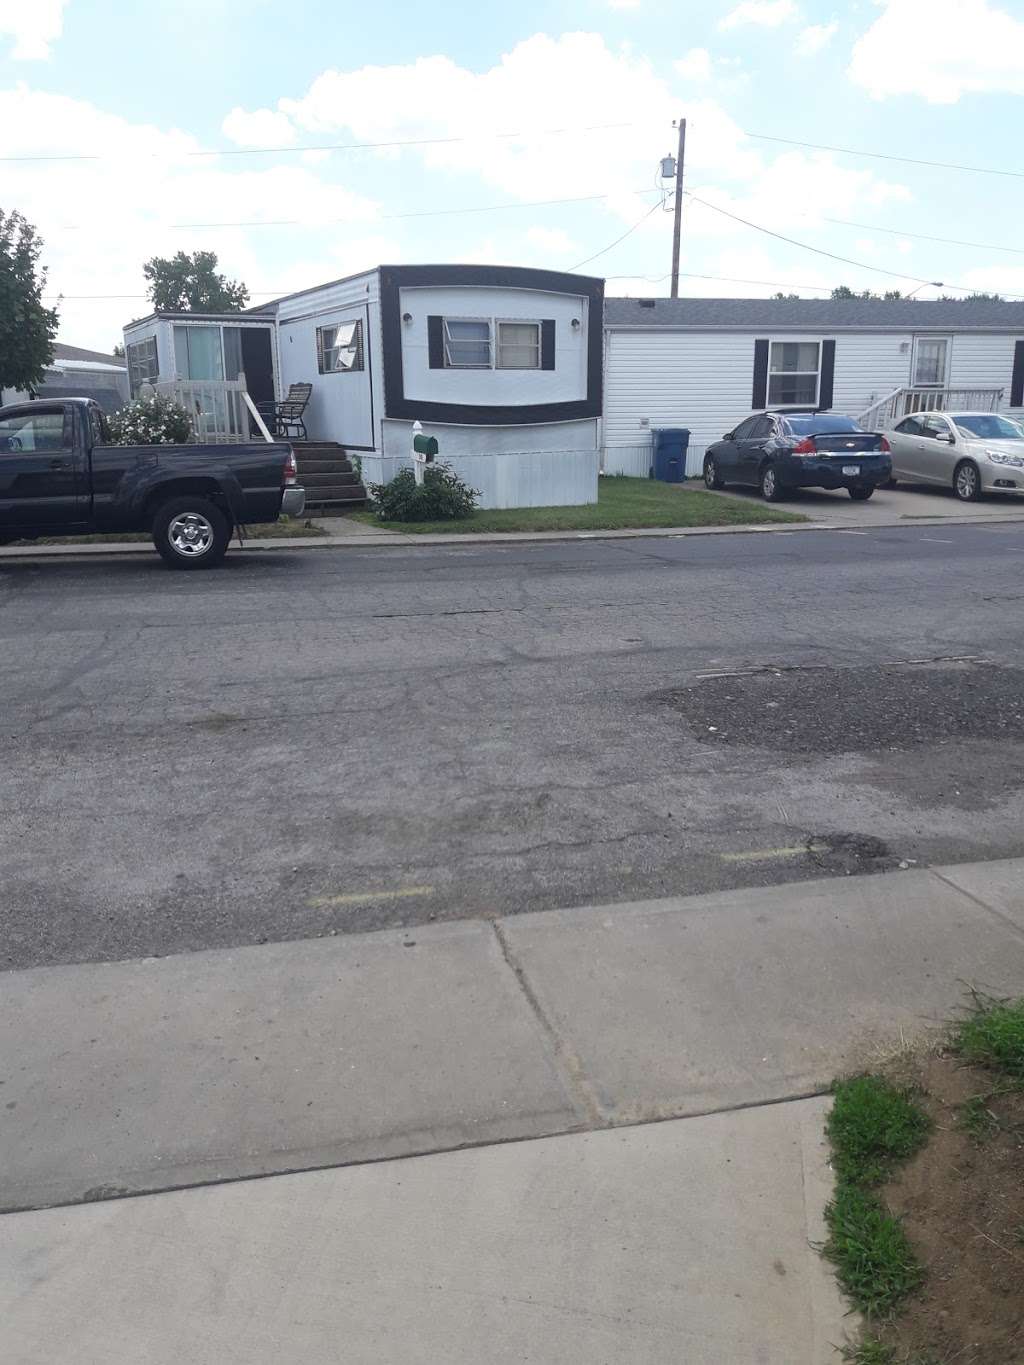 Post Acres Mobile Home Park | 5135 N Post Rd, Indianapolis, IN 46226 | Phone: (317) 898-7662